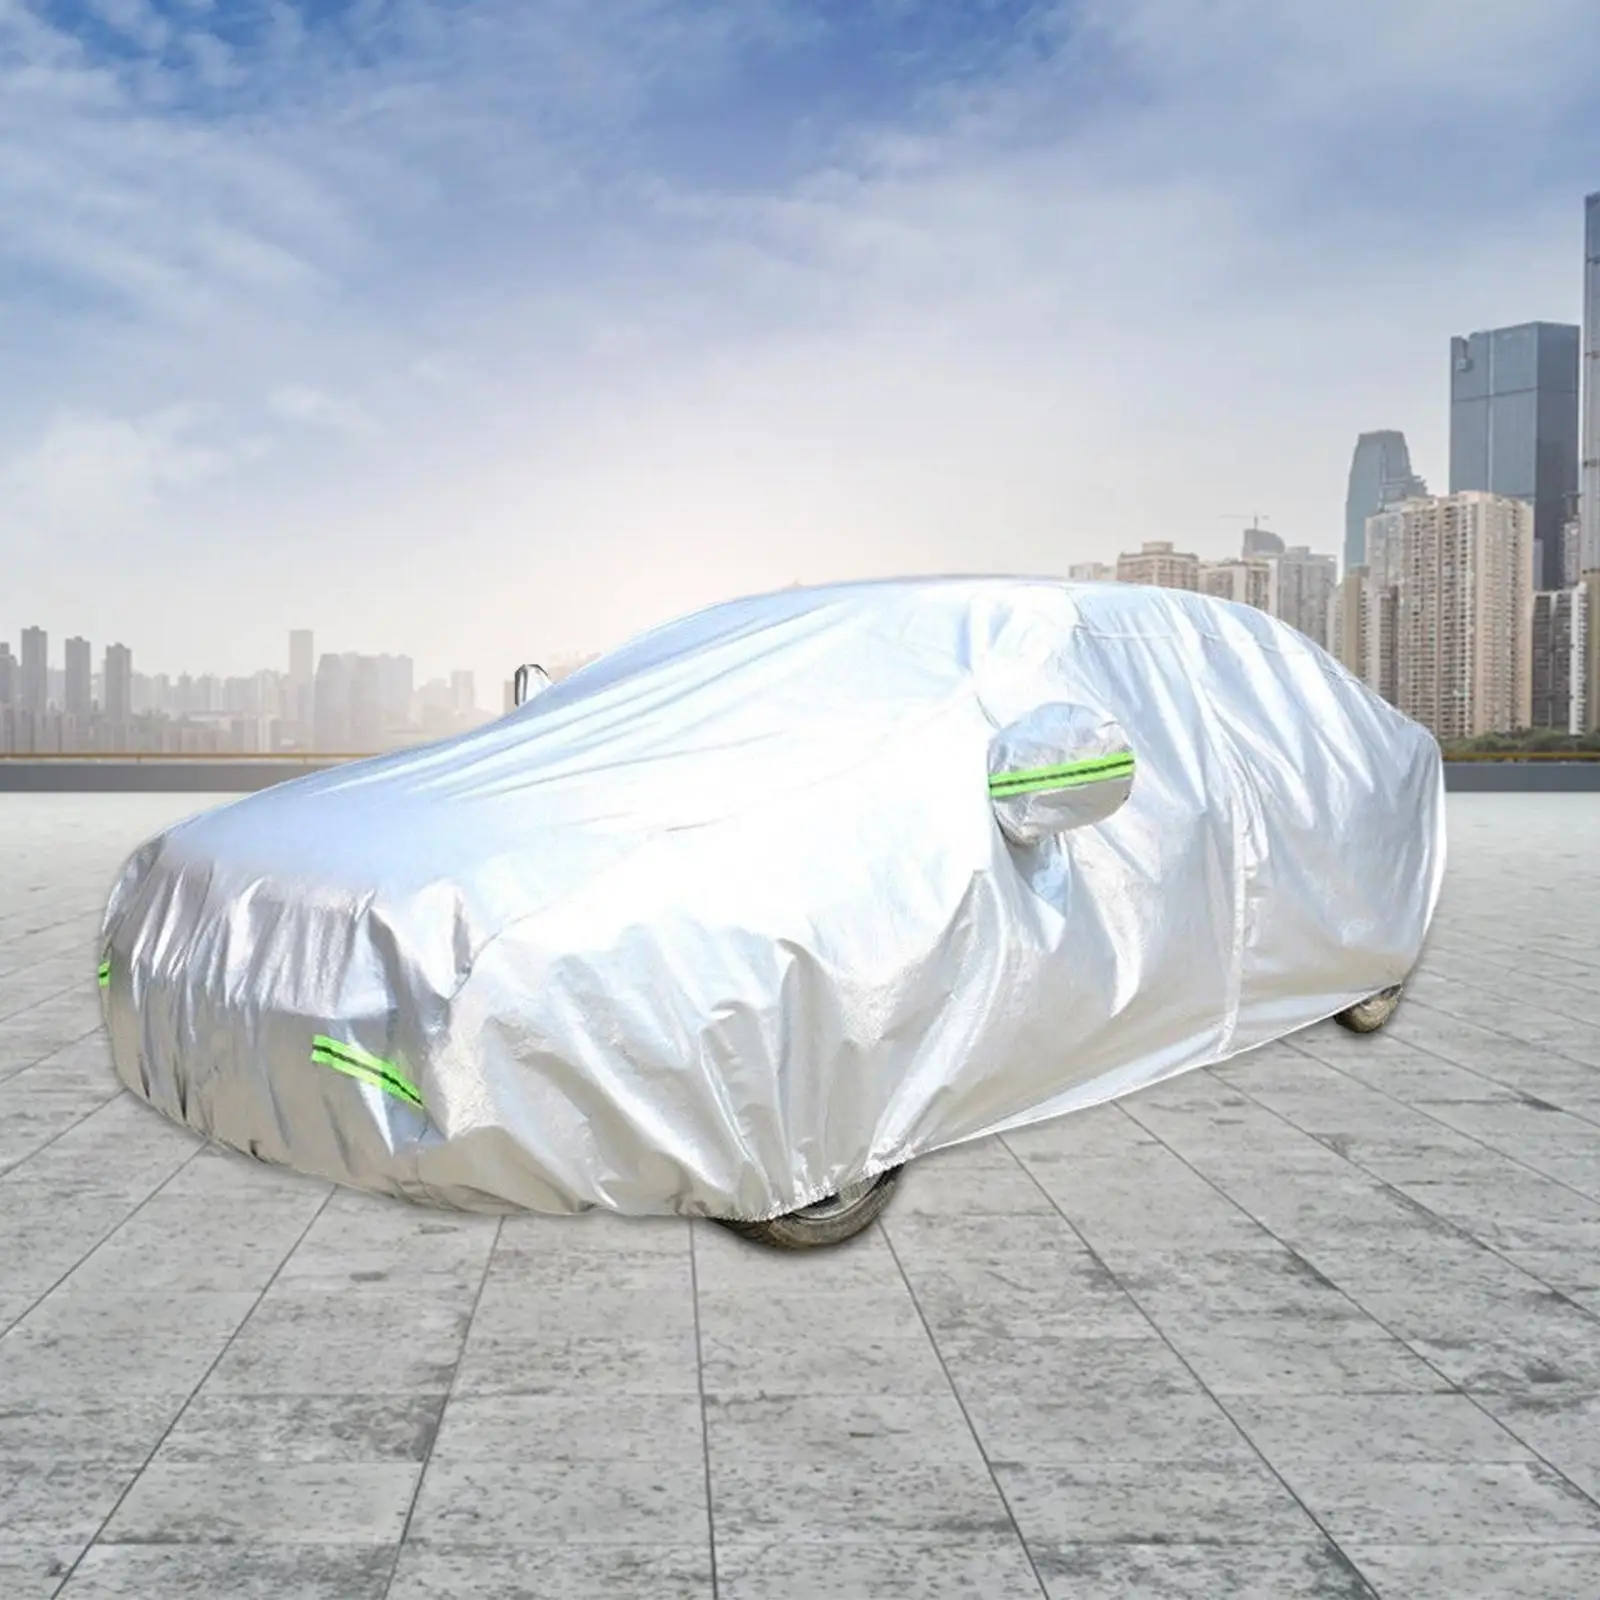 All Weather Car Cover Water Resistant Protection Cover for Byd Atto 3 Yuan Plus